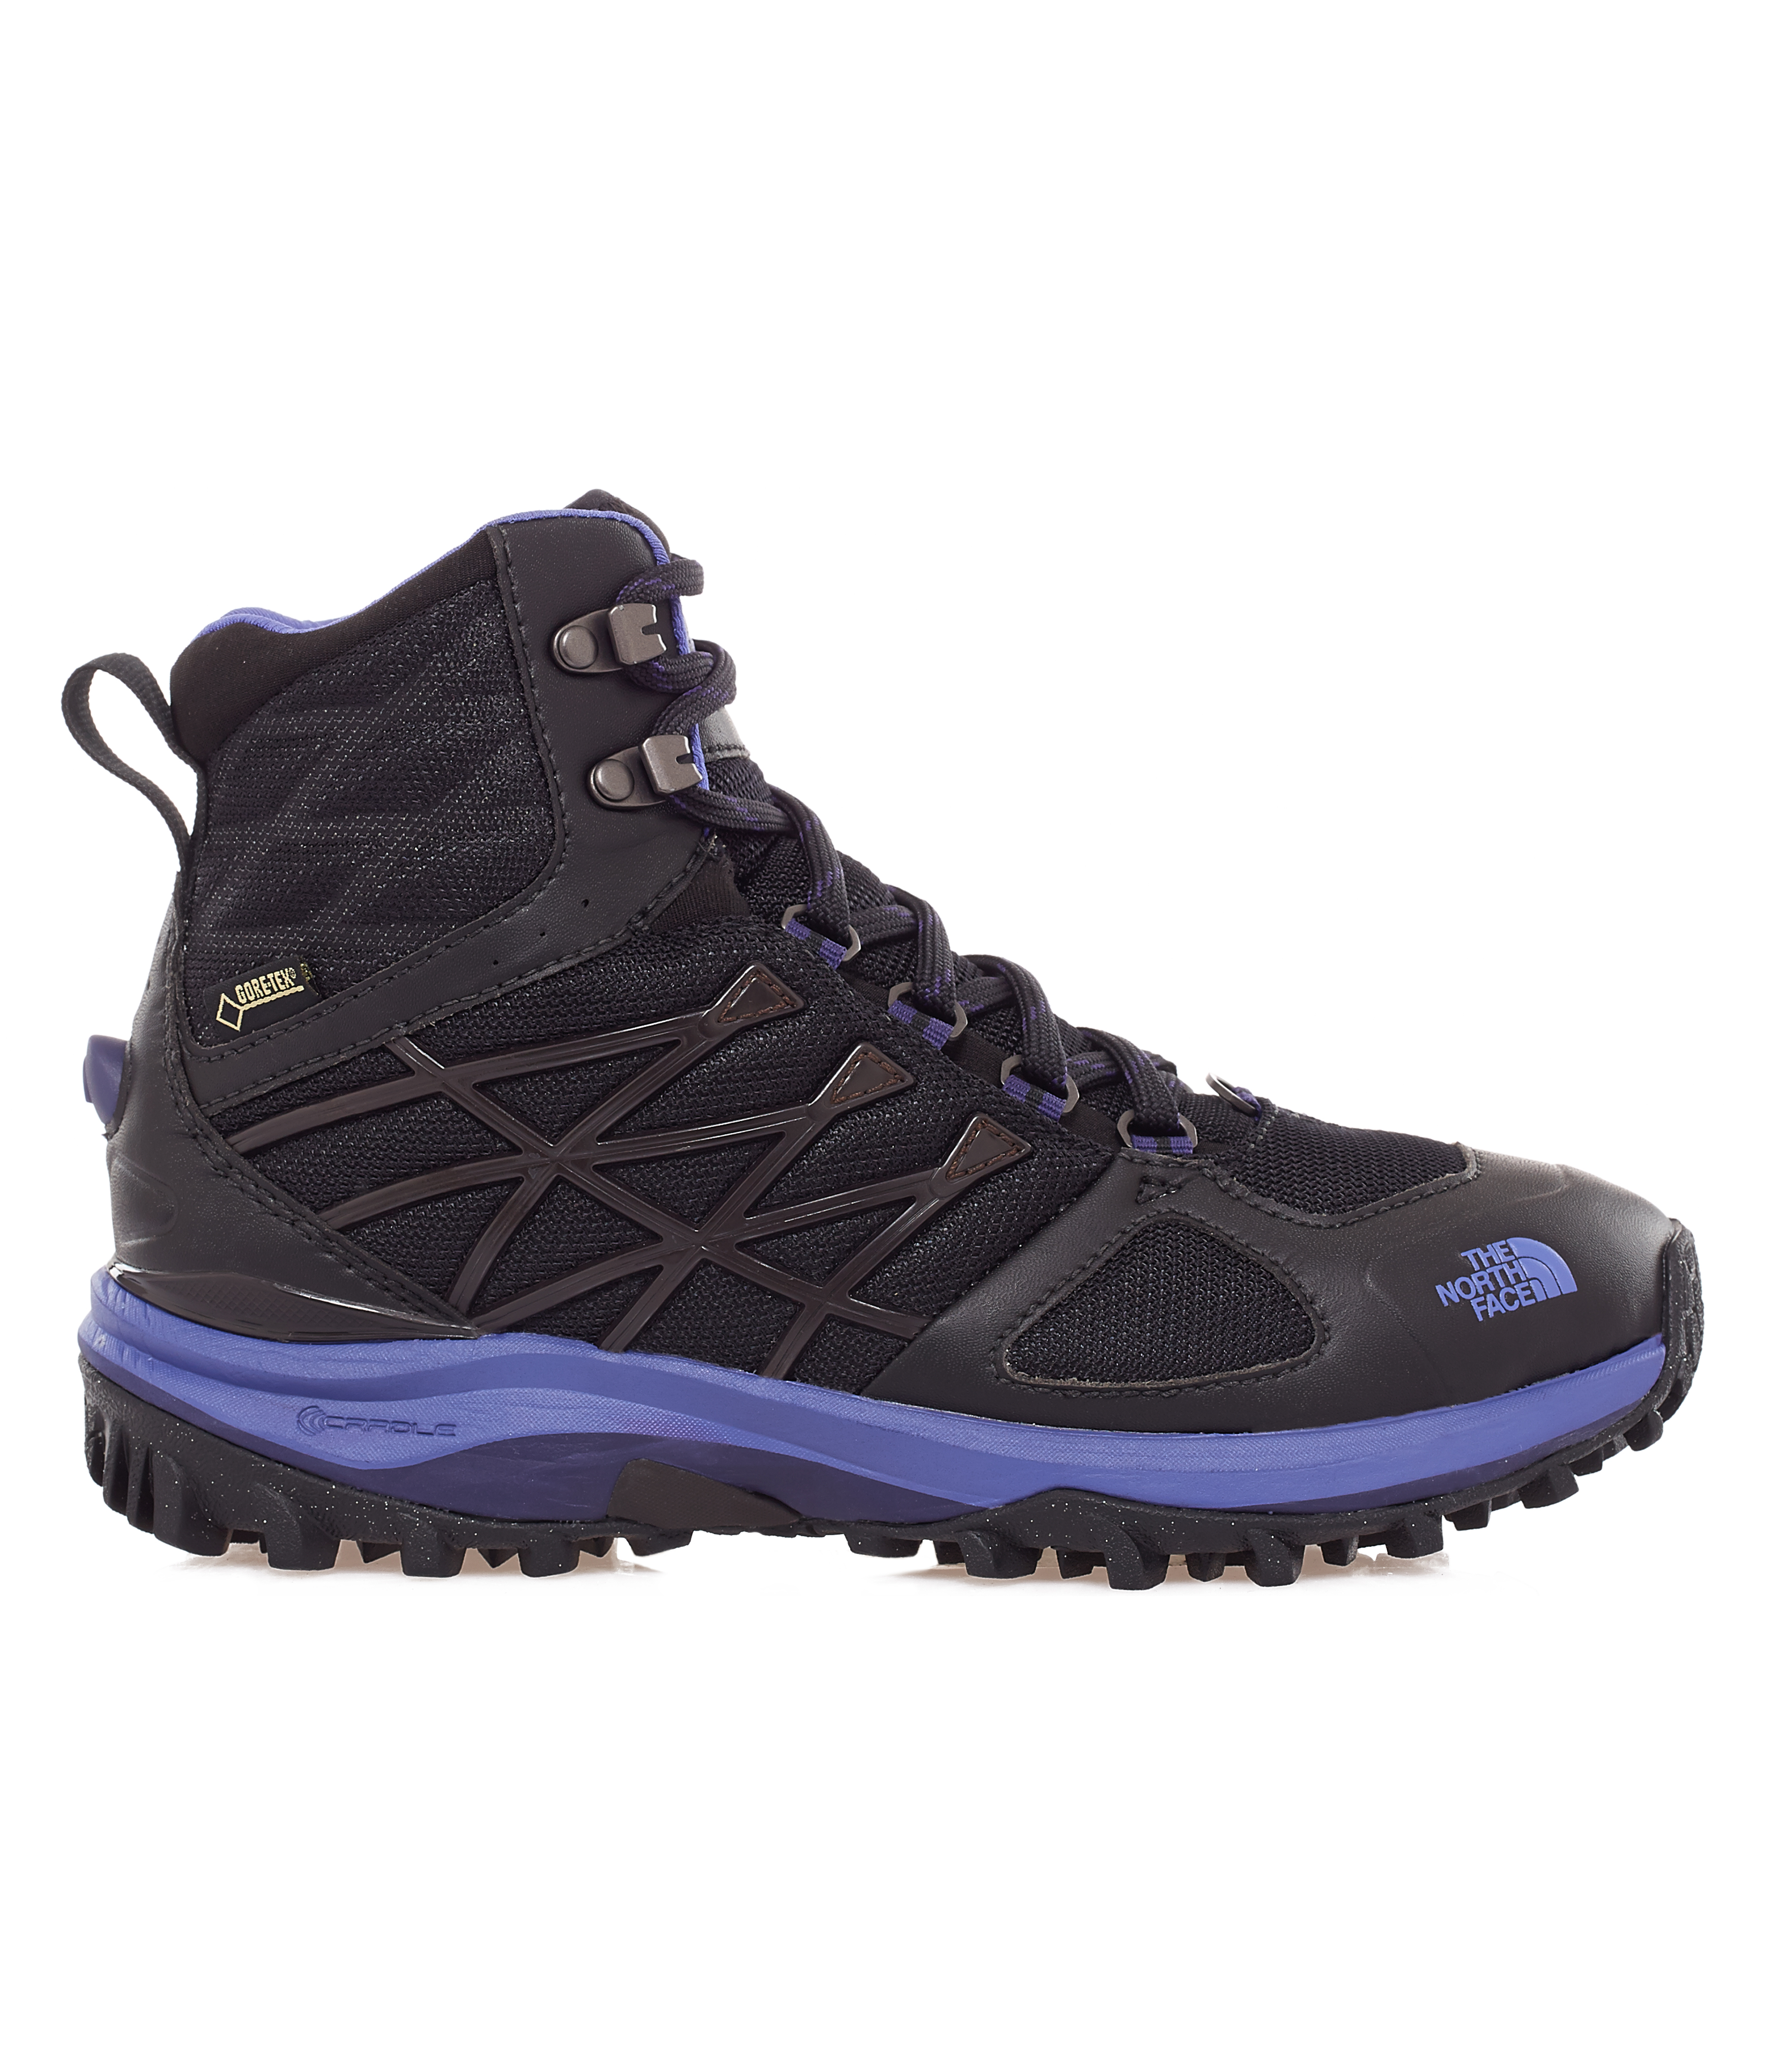 Im BERGSTEIGER Test 01/16: THE NORTH FACE Ultra Extreme II GTX